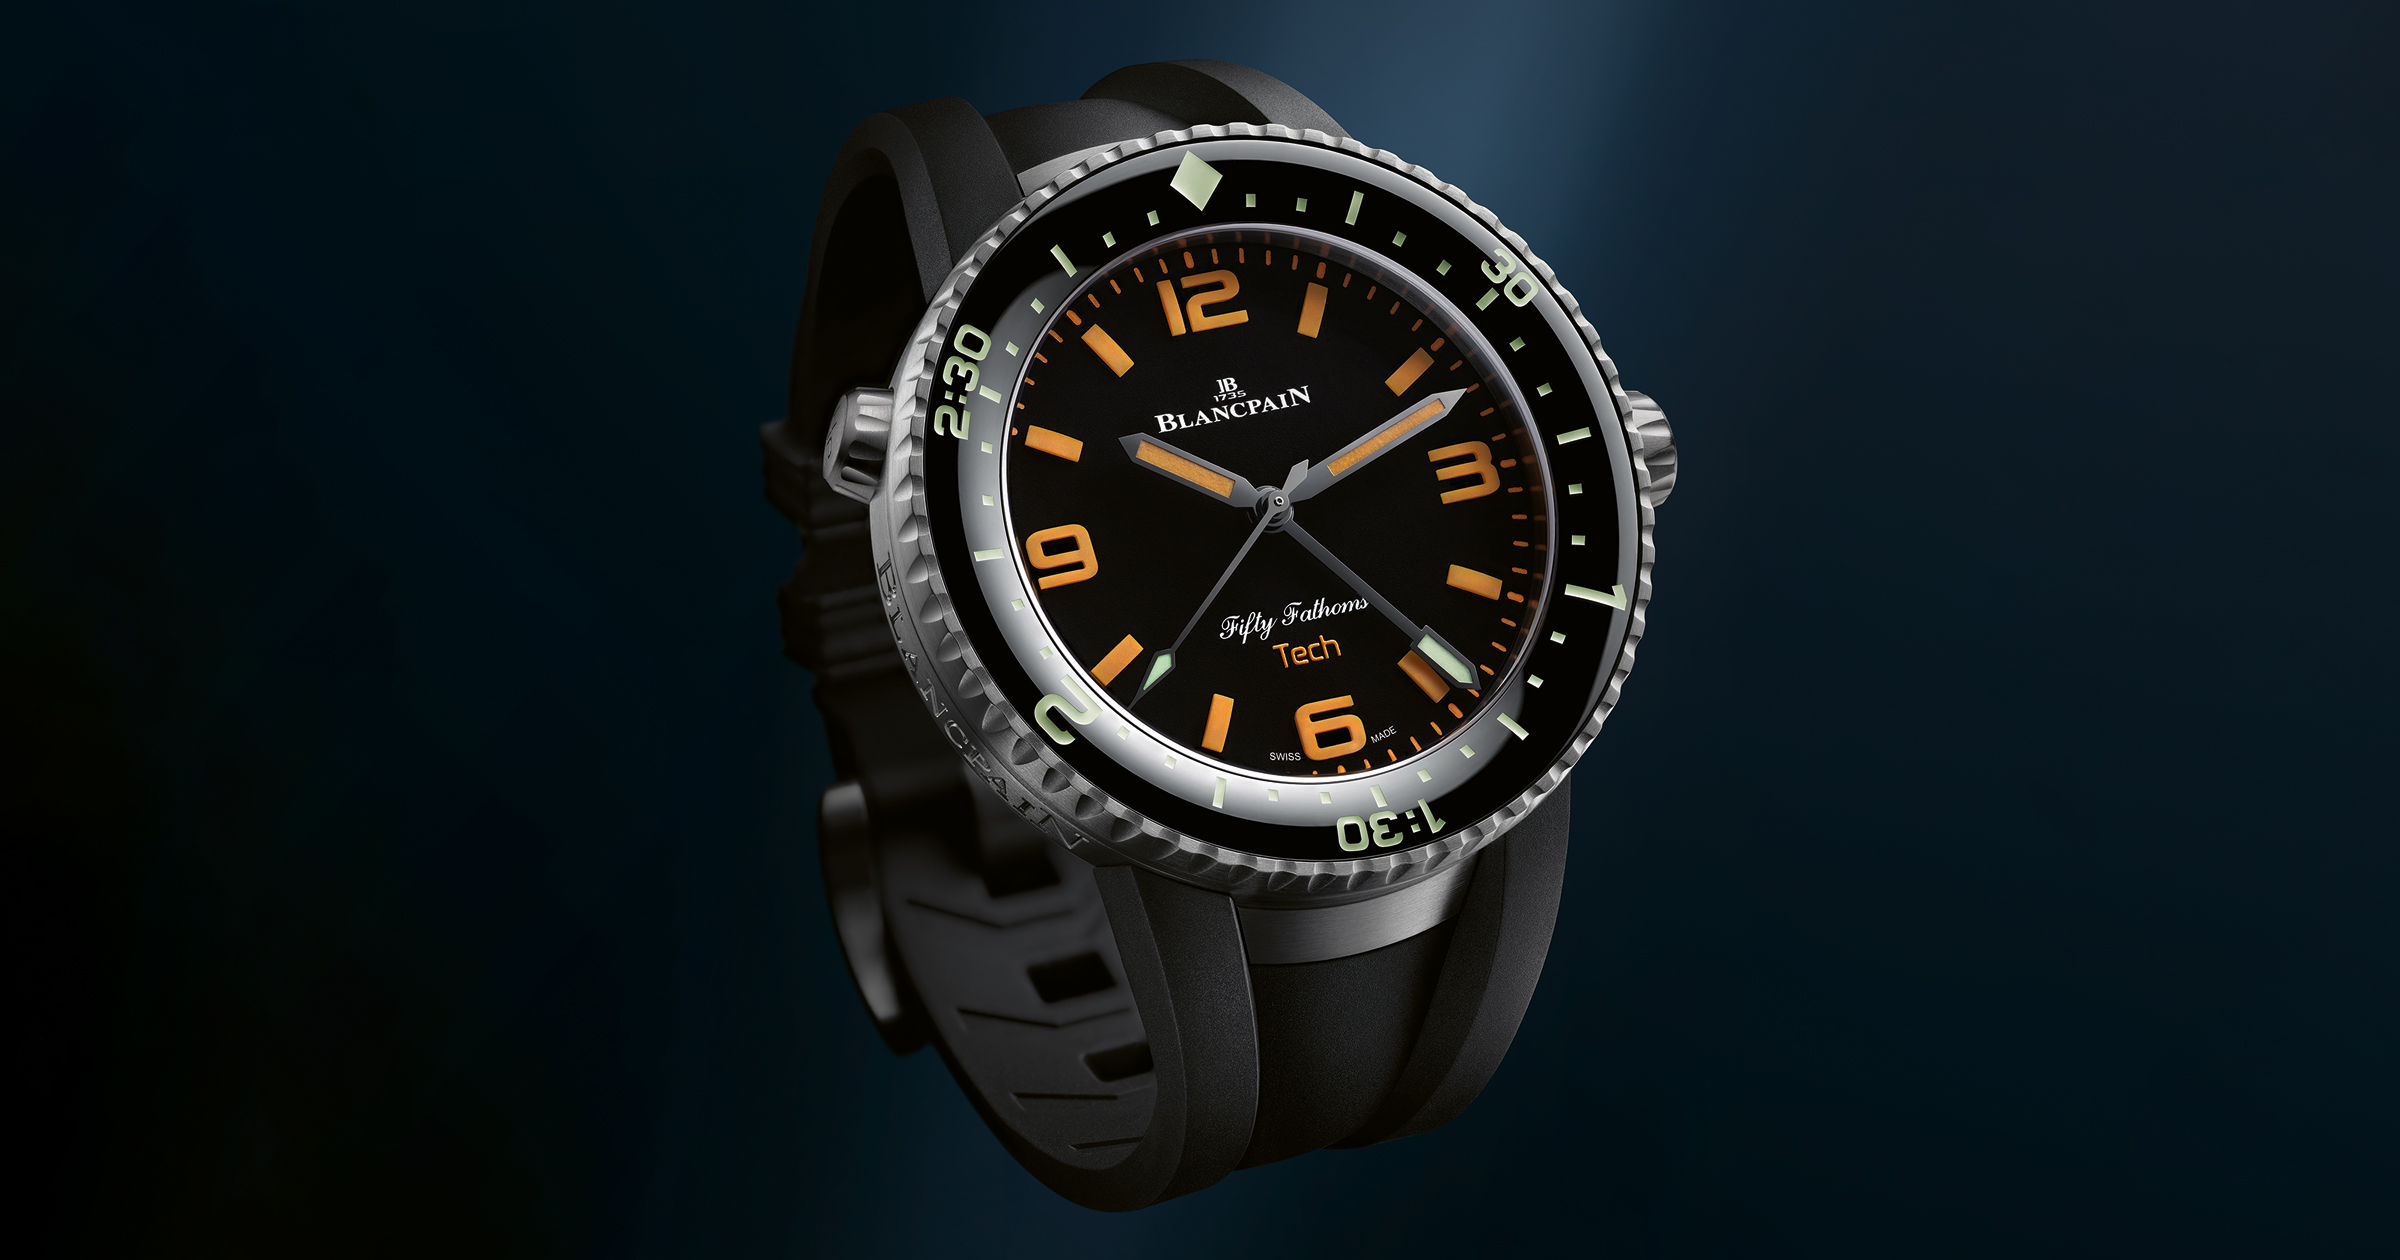 New Blancpain Divers Celebrate 70 Years of the Fifty Fathoms